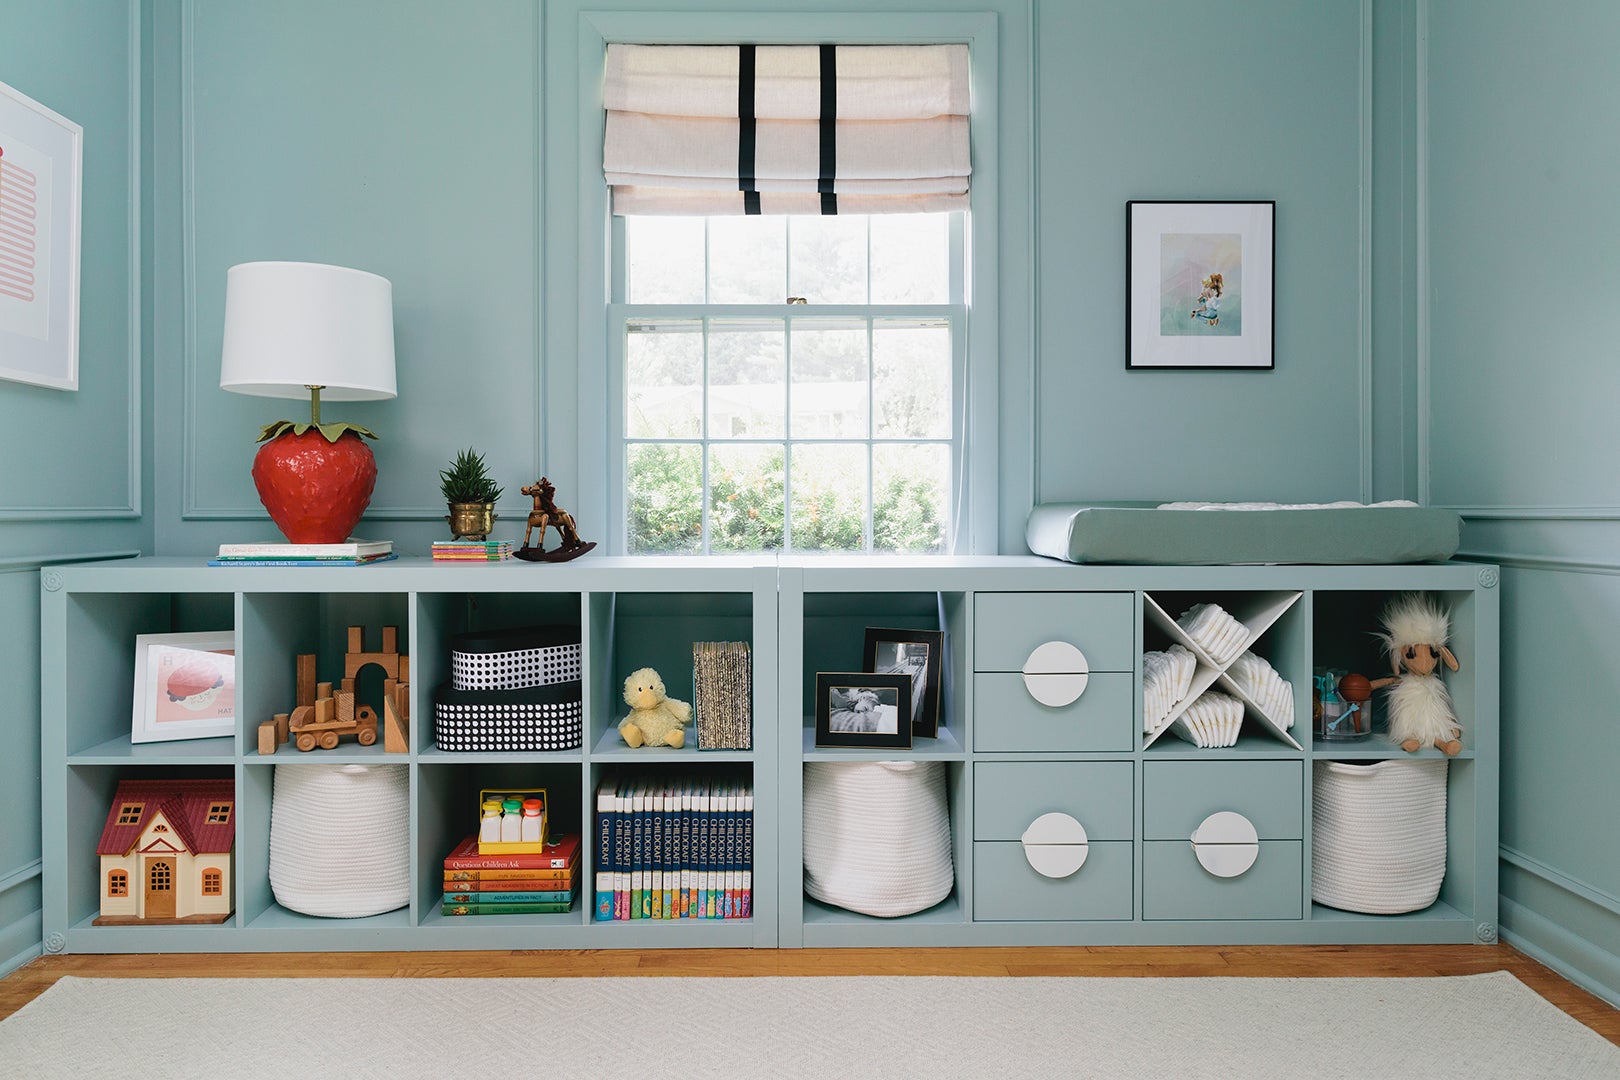 This Designer Broke All the Rules Decorating Her Robin’s-Egg Blue “Un-Nursery”